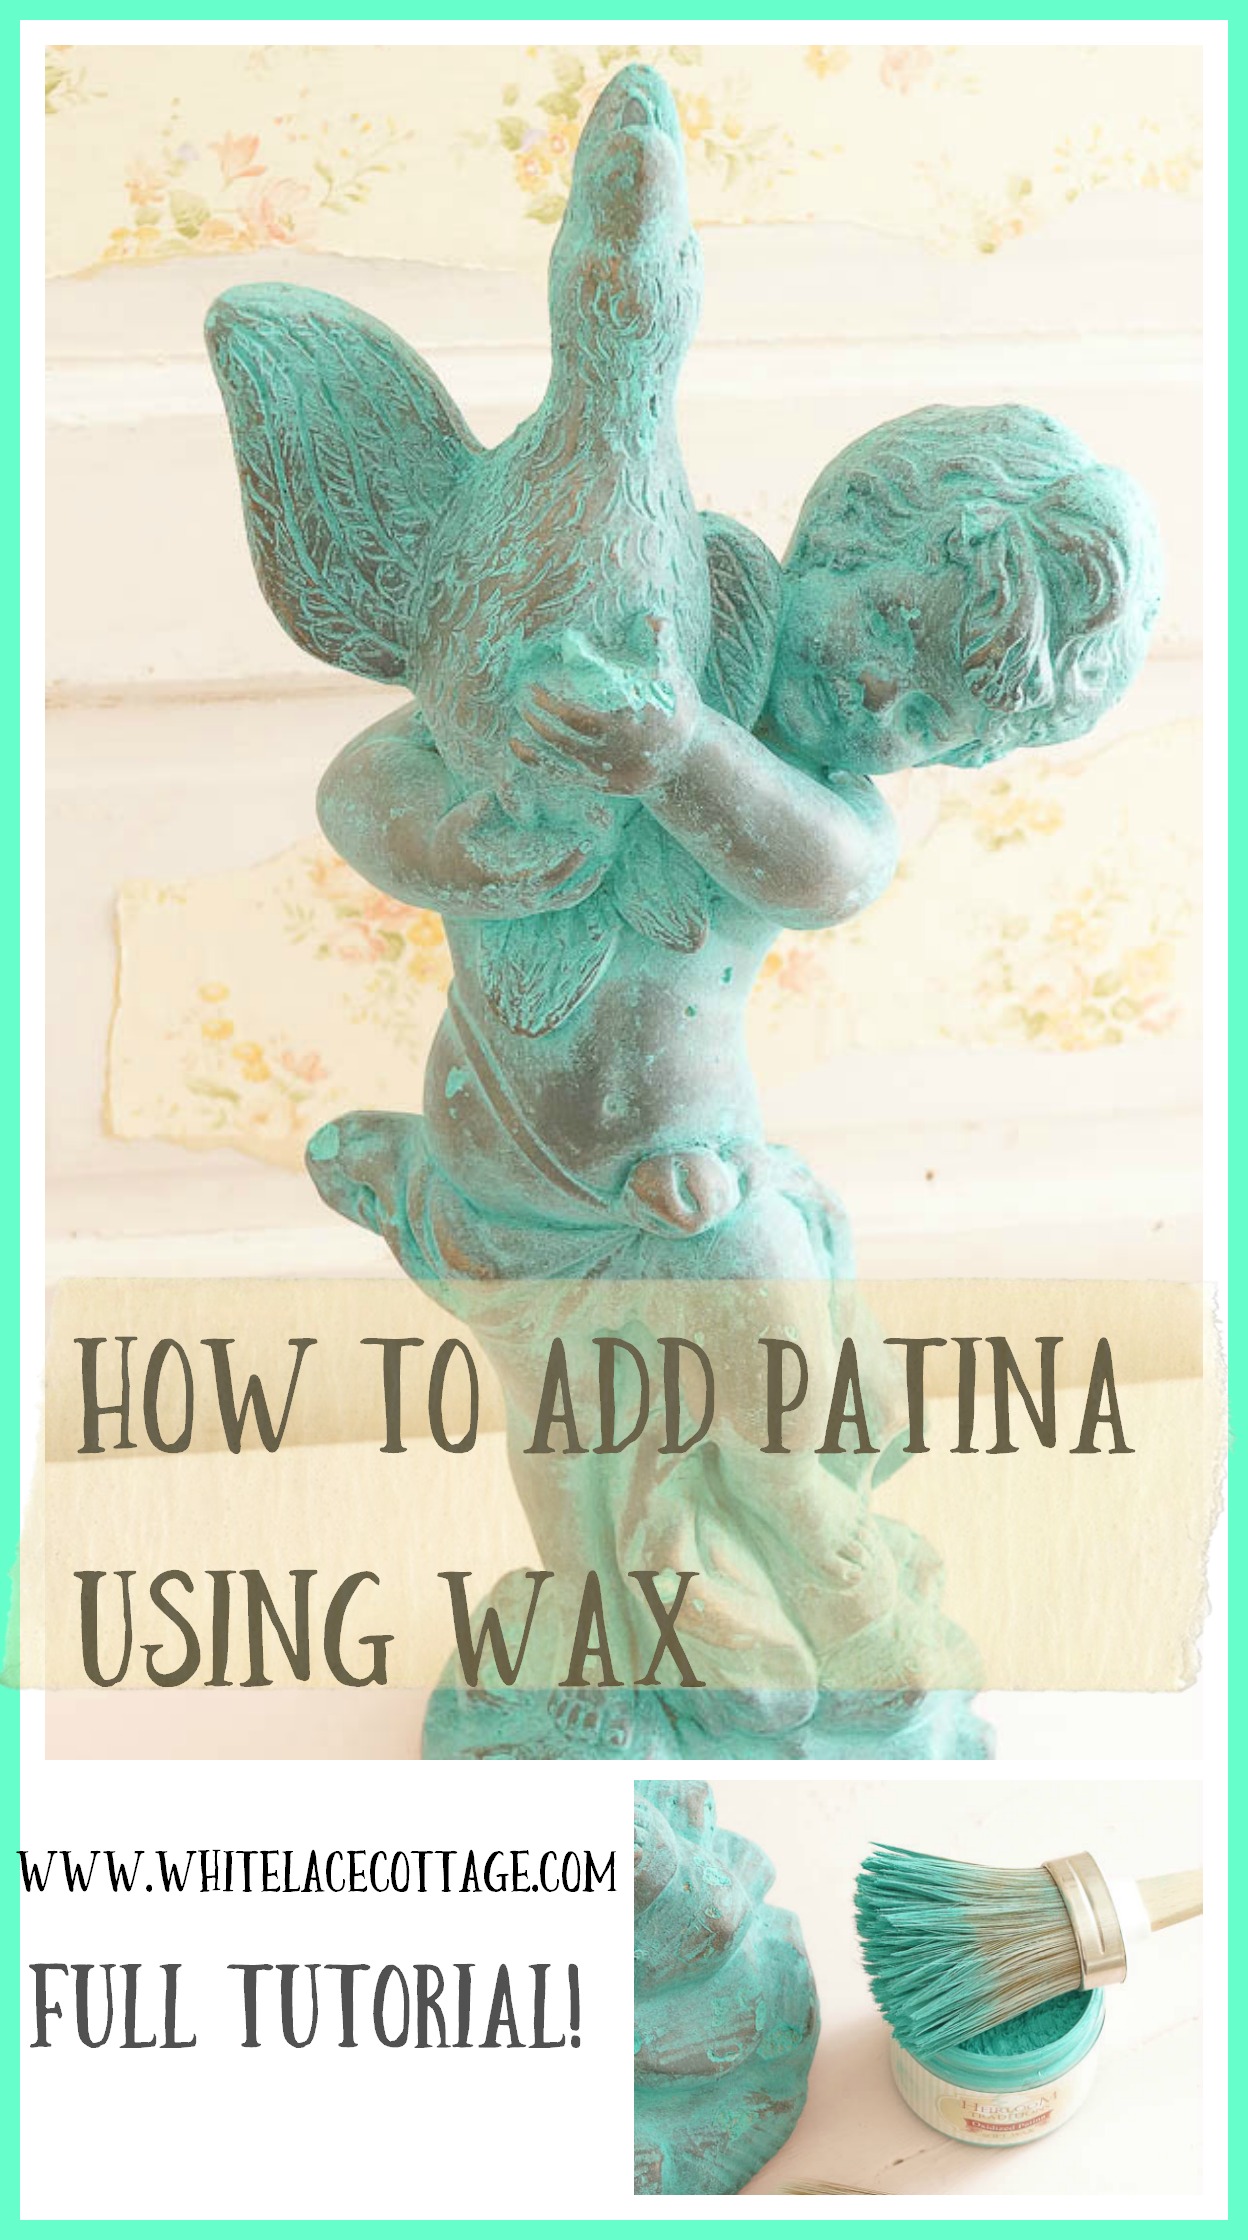 How to add patina using wax